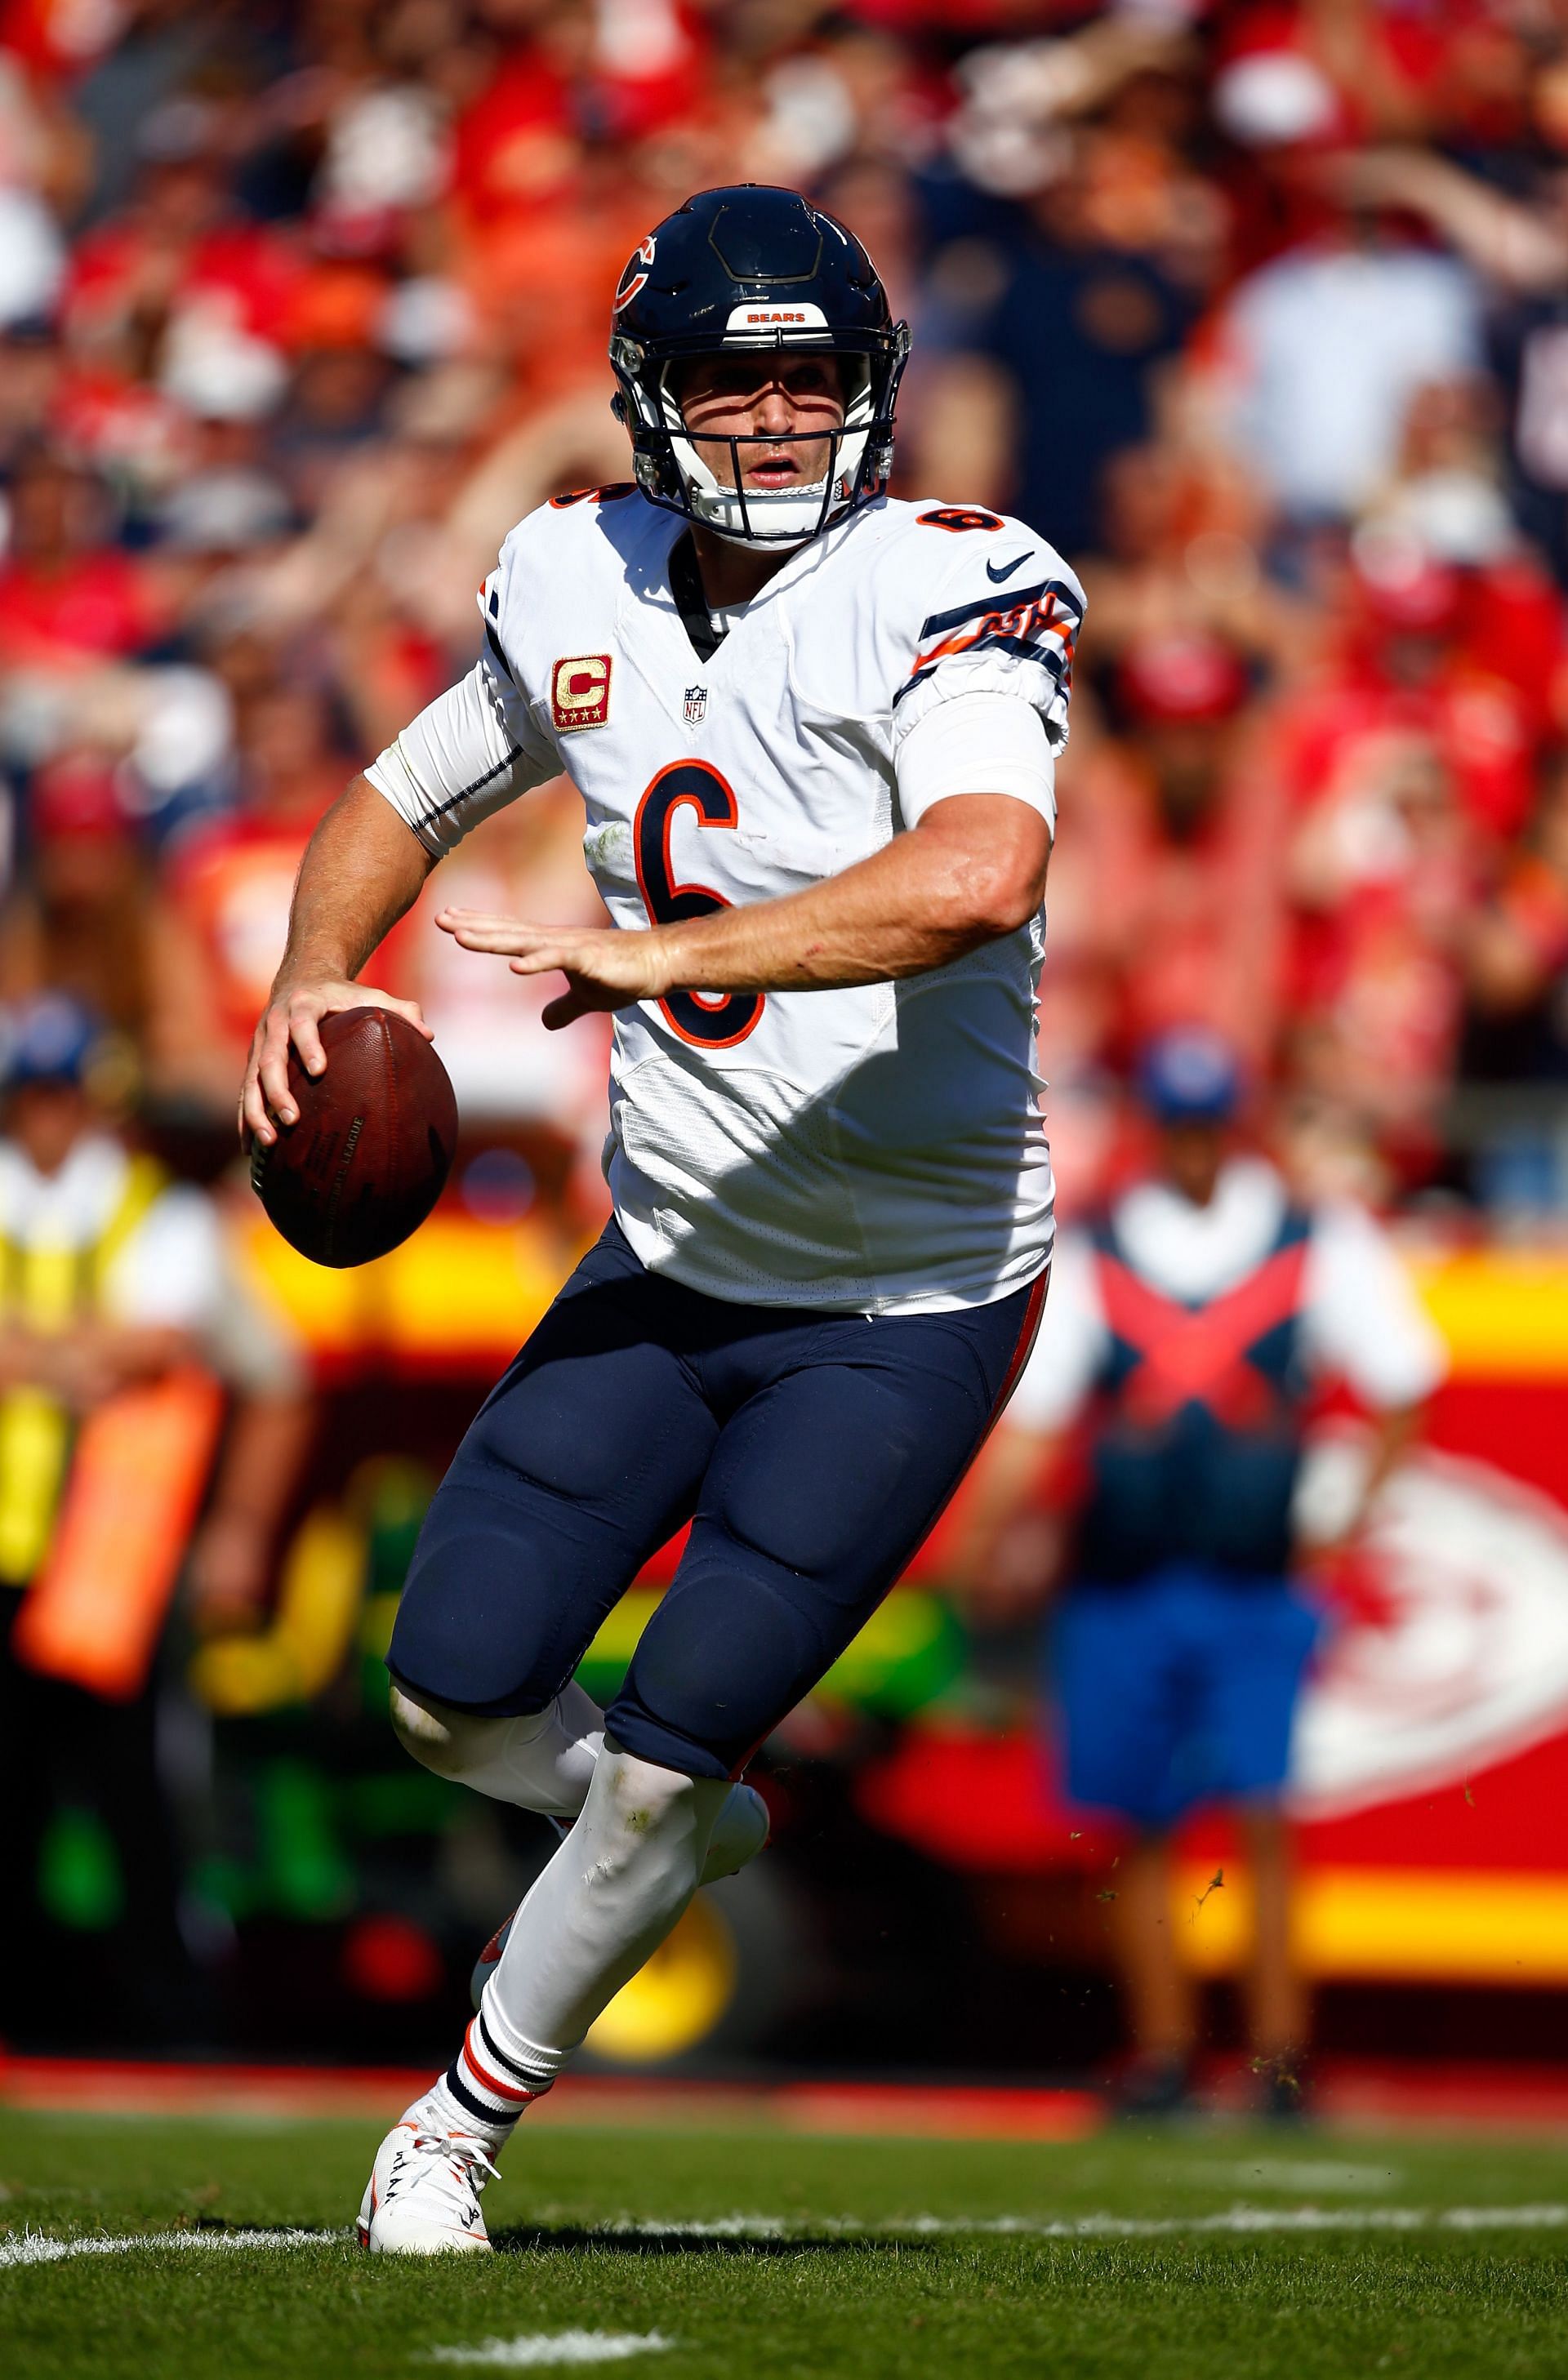 Cutler as a member of the Chicago Bears from 2009 - 2016